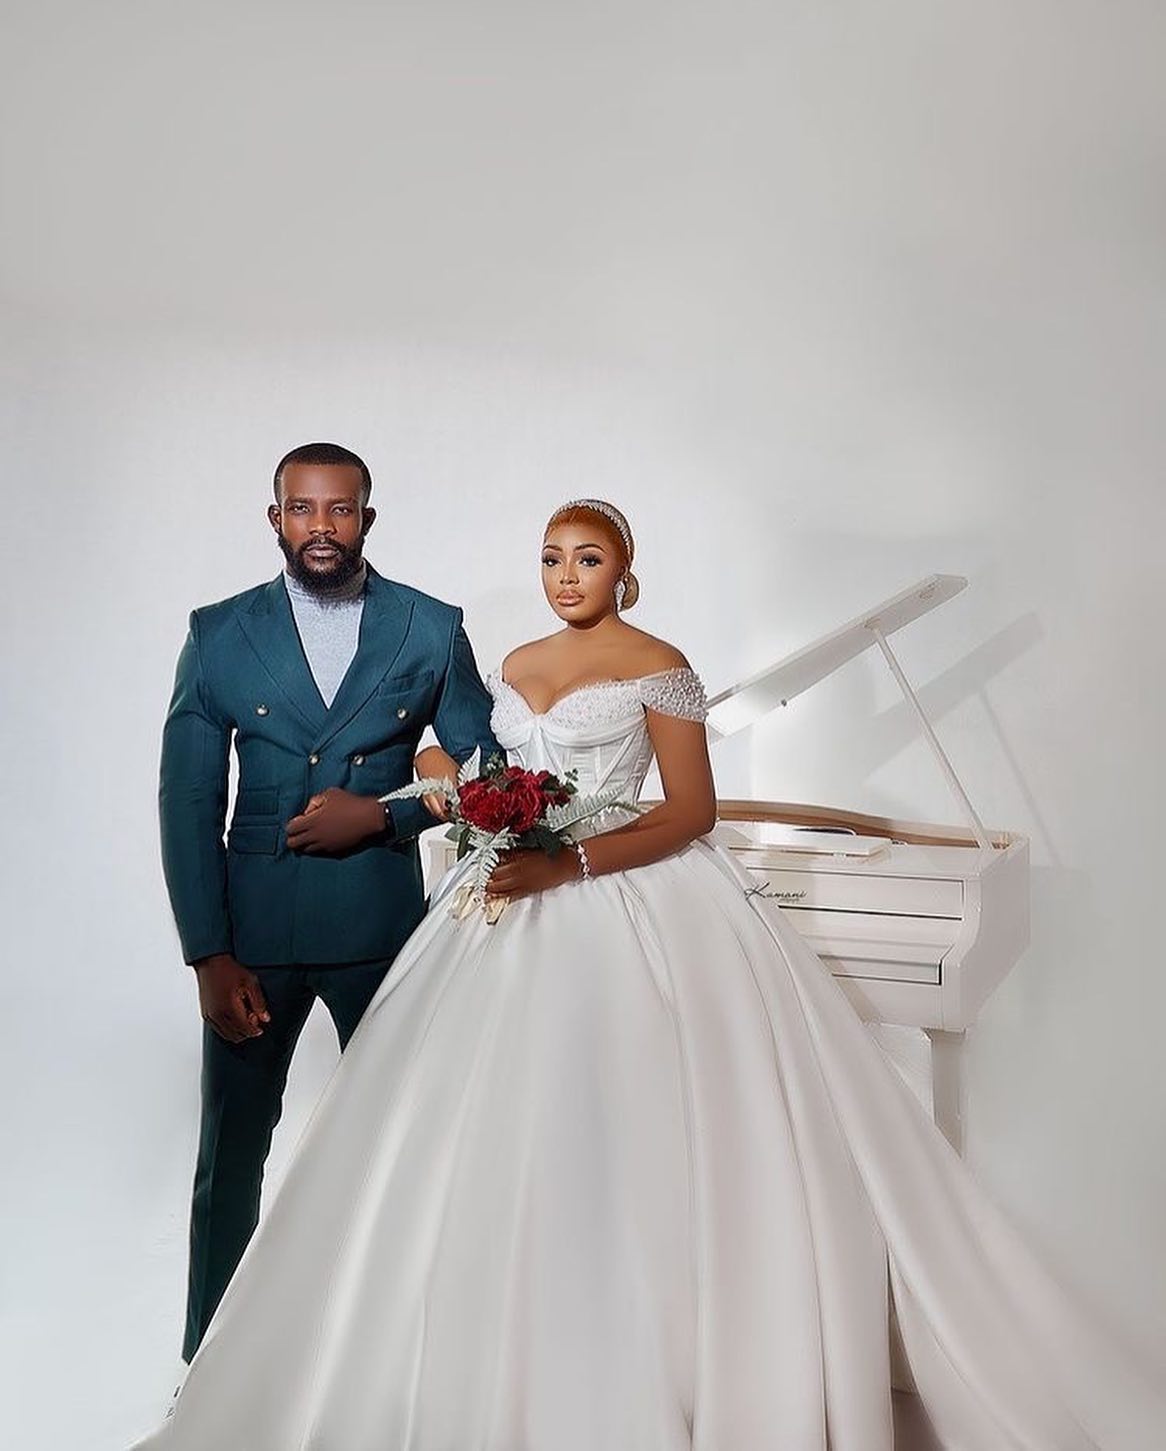 This Wedding Styled Shoot Speaks The Language Of Class And Elegance